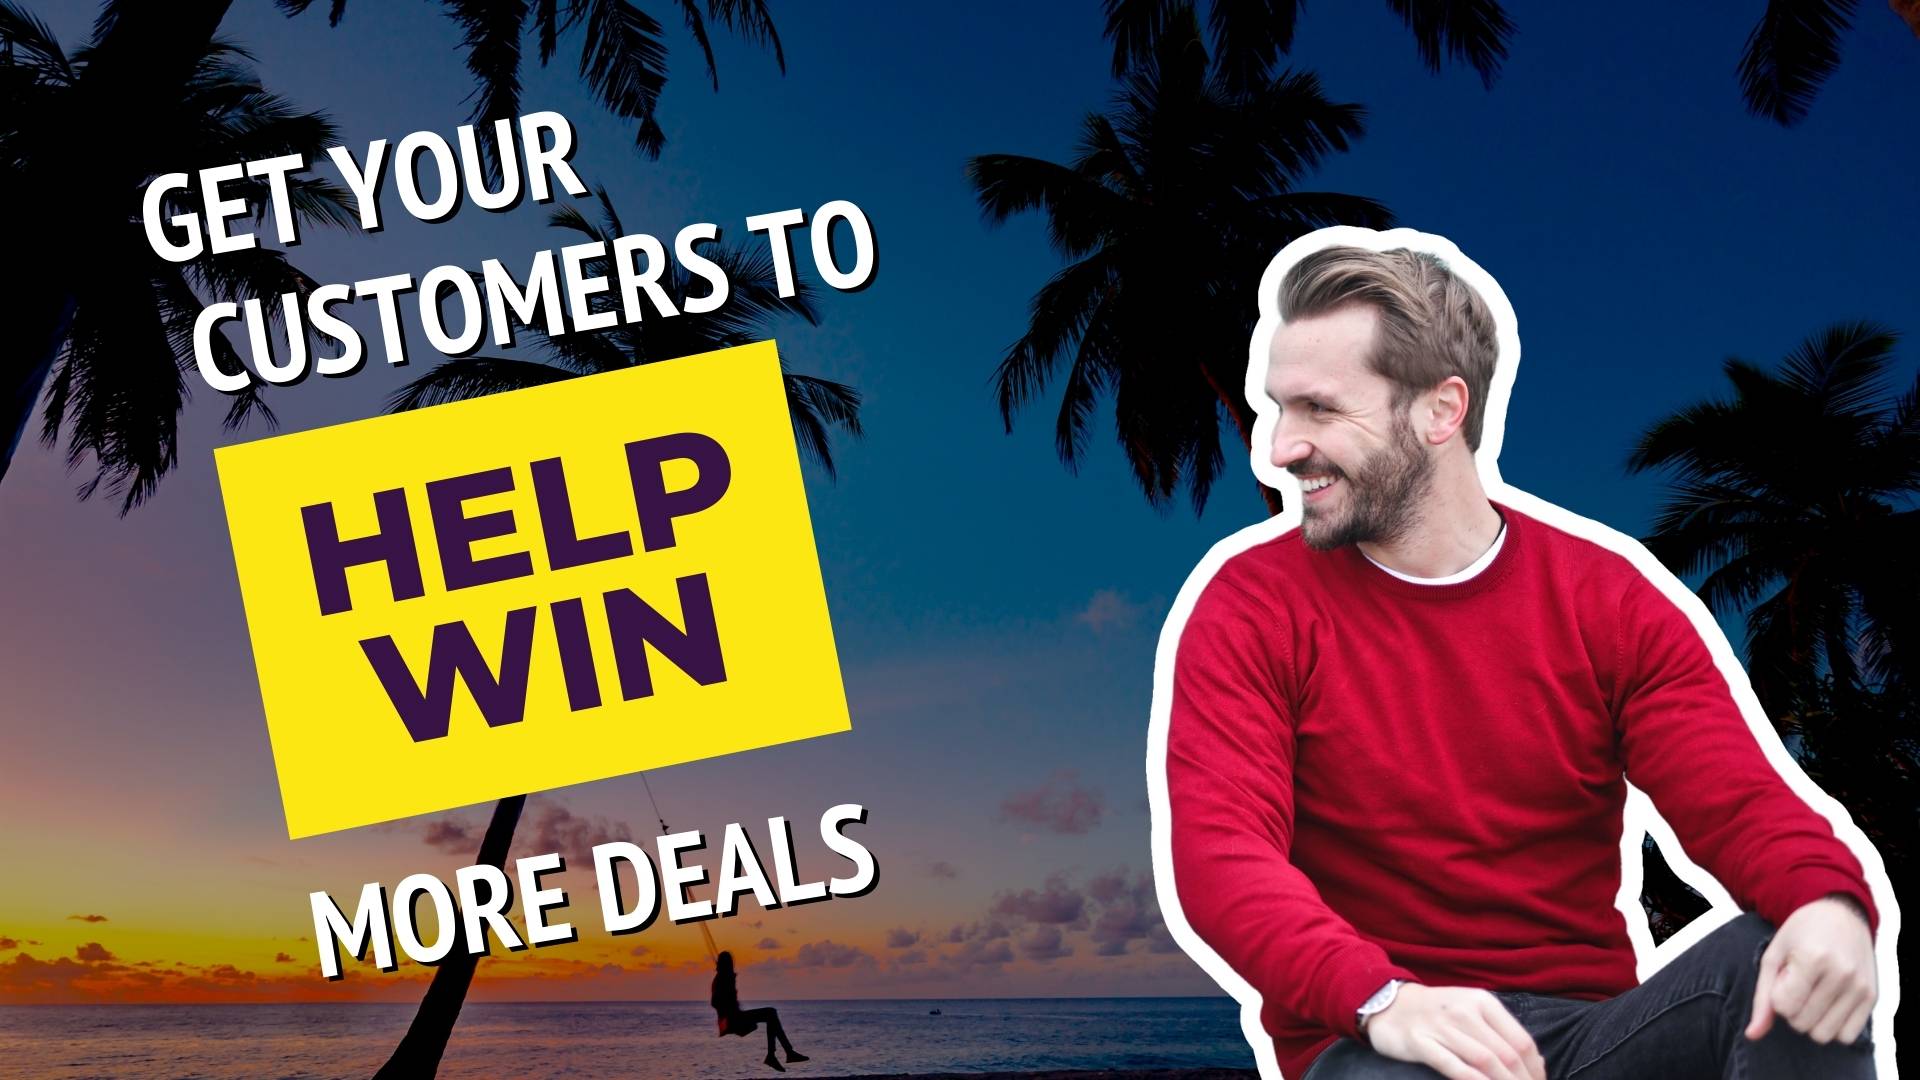 Get Your Customers To Help Win More Deals